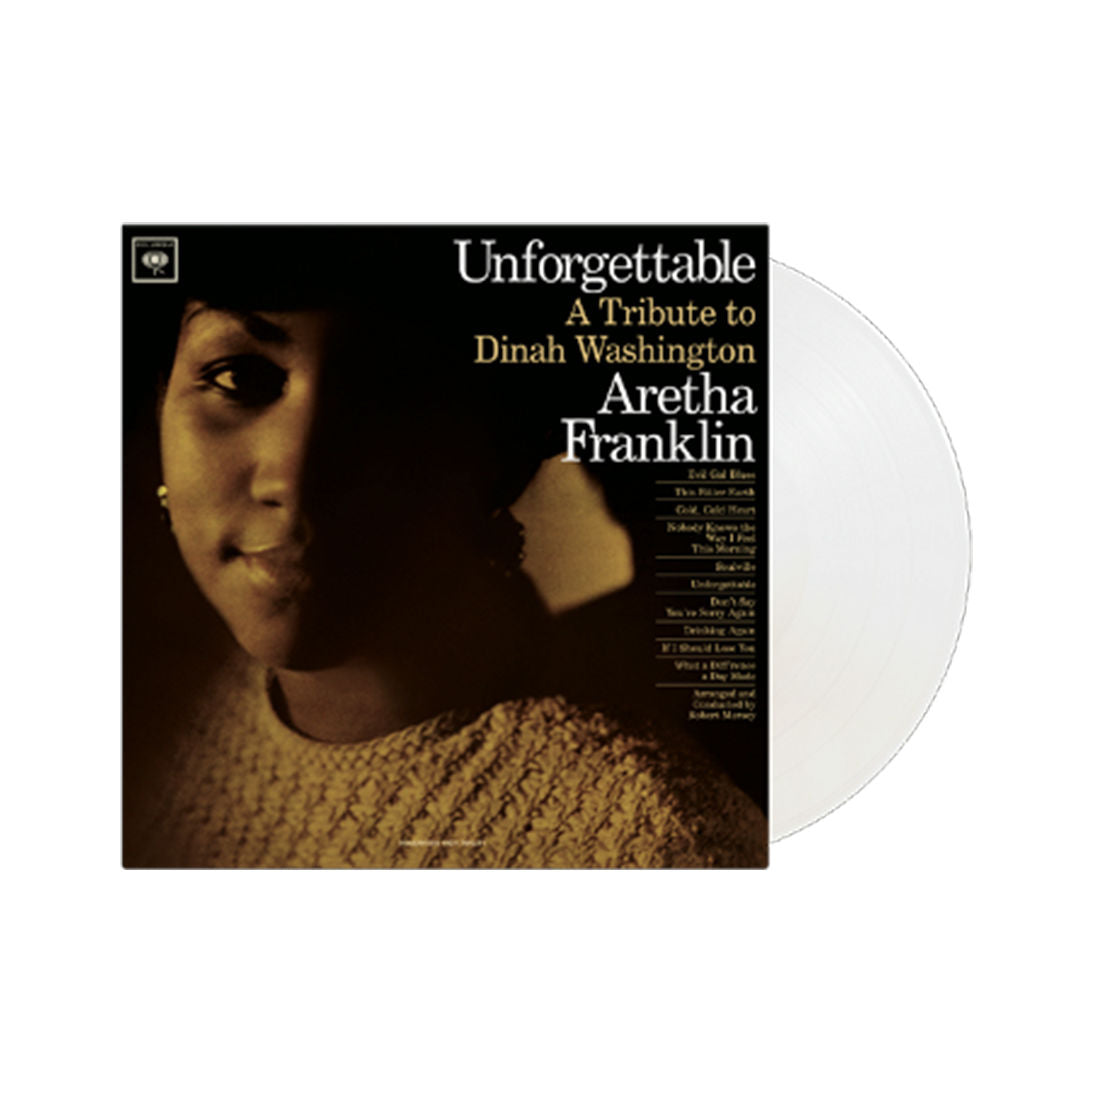 Unforgettable (Tribute To Dinah Washington): Limited Crystal Clear Vinyl LP